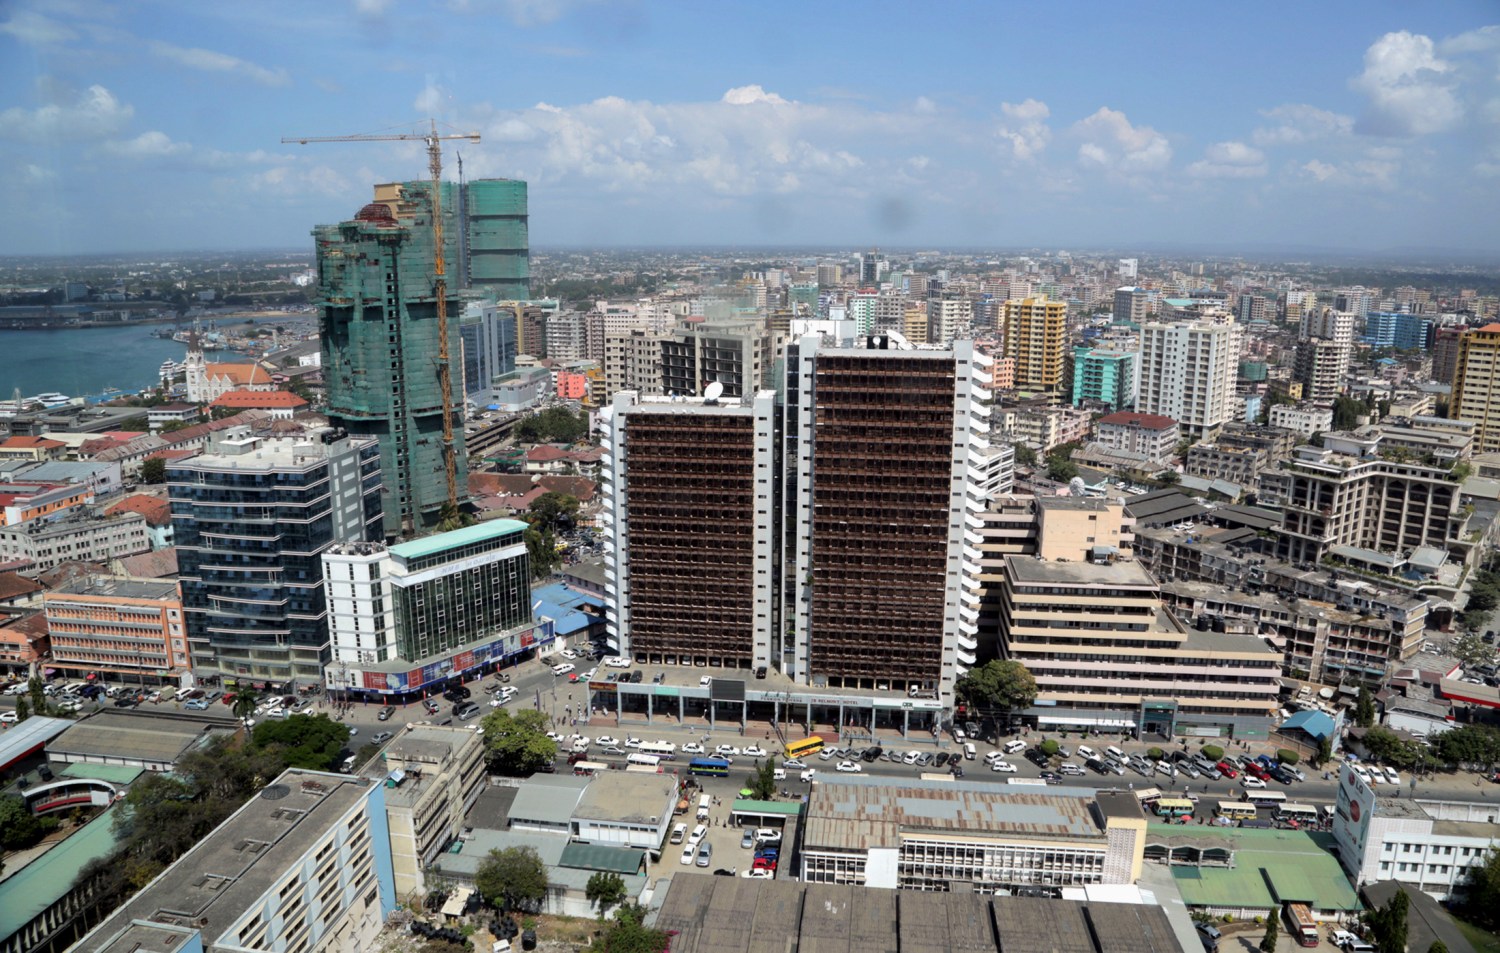 A general picture shows the skyline of Tanzania's port city of Dar es Salaam, July 12, 2013. Tanzania's commercial capital looks like a boom town even before cash rolls in from gas discoveries that in the next few years could make the east African nation a major energy exporter. Glass-clad tower blocks pierce Dar es Salaam's sky-line and more are emerging from noisy building sites. Billboards advertise high-definition televisions and other electronics to a new middle class, who crowd brand new shopping malls. REUTERS/Andrew Emmanuel (TANZANIA - Tags: SOCIETY BUSINESS ENERGY) - GM1E97C1S1L01